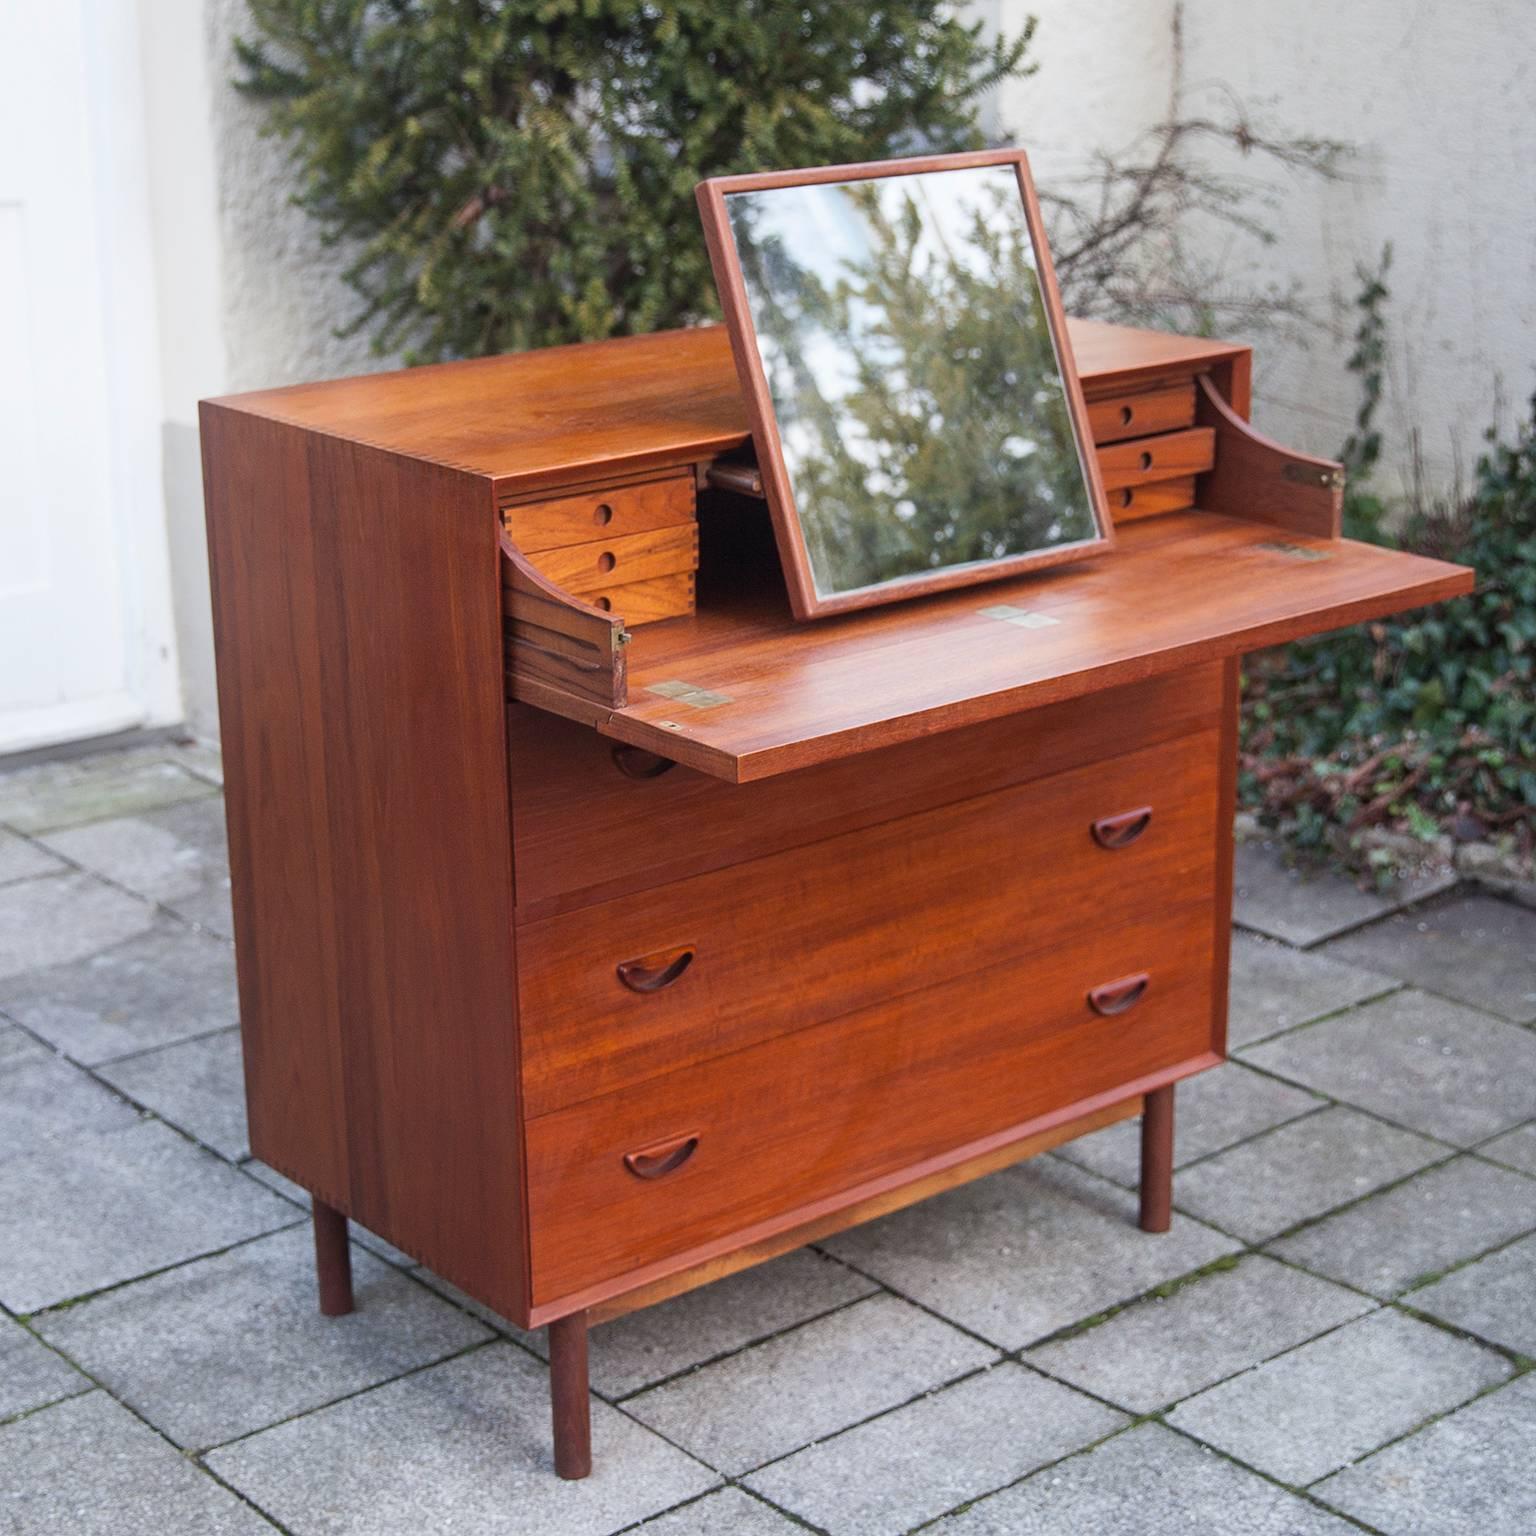 Peter Hvidt and Orla Mølgaard-Nielsen designed this handsome gentleman's dresser for J. Jacobsen and Sonner. The teak case sits on plinth base and features exposed finger joinery and sculpted drawer pulls. There are three drawers. Above them, the